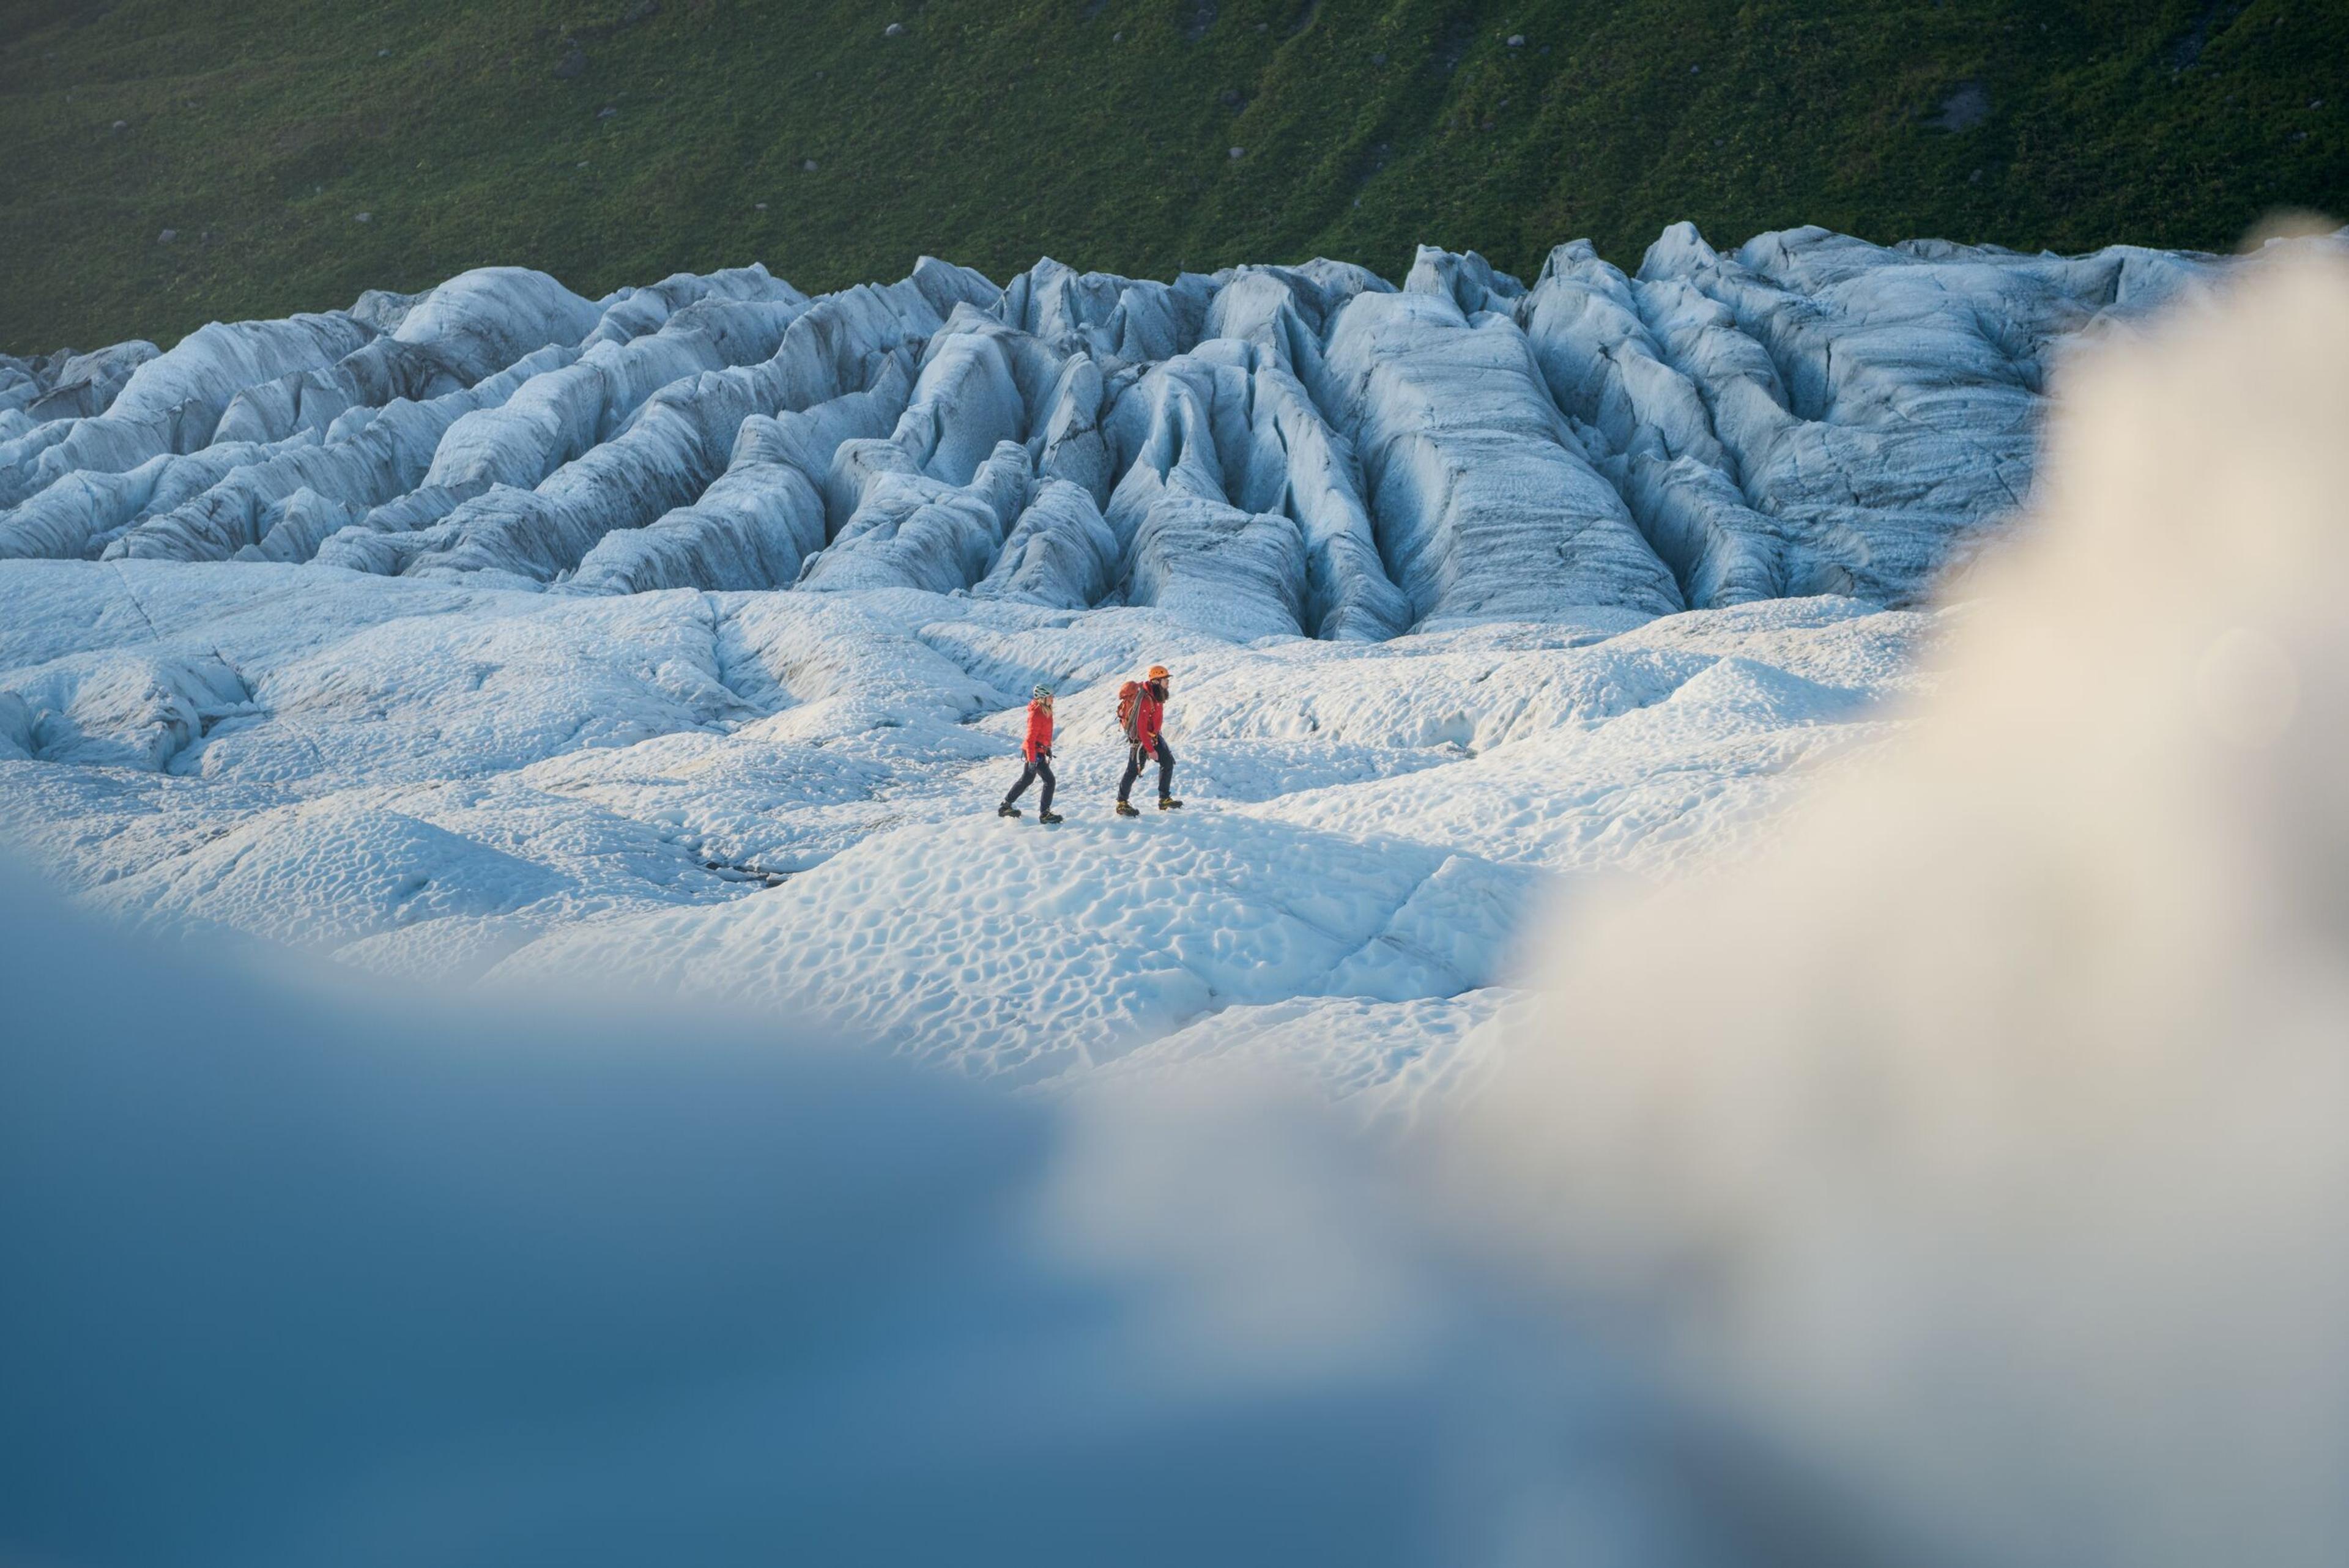 Two hikers navigating the expansive icy terrain of a glacier.